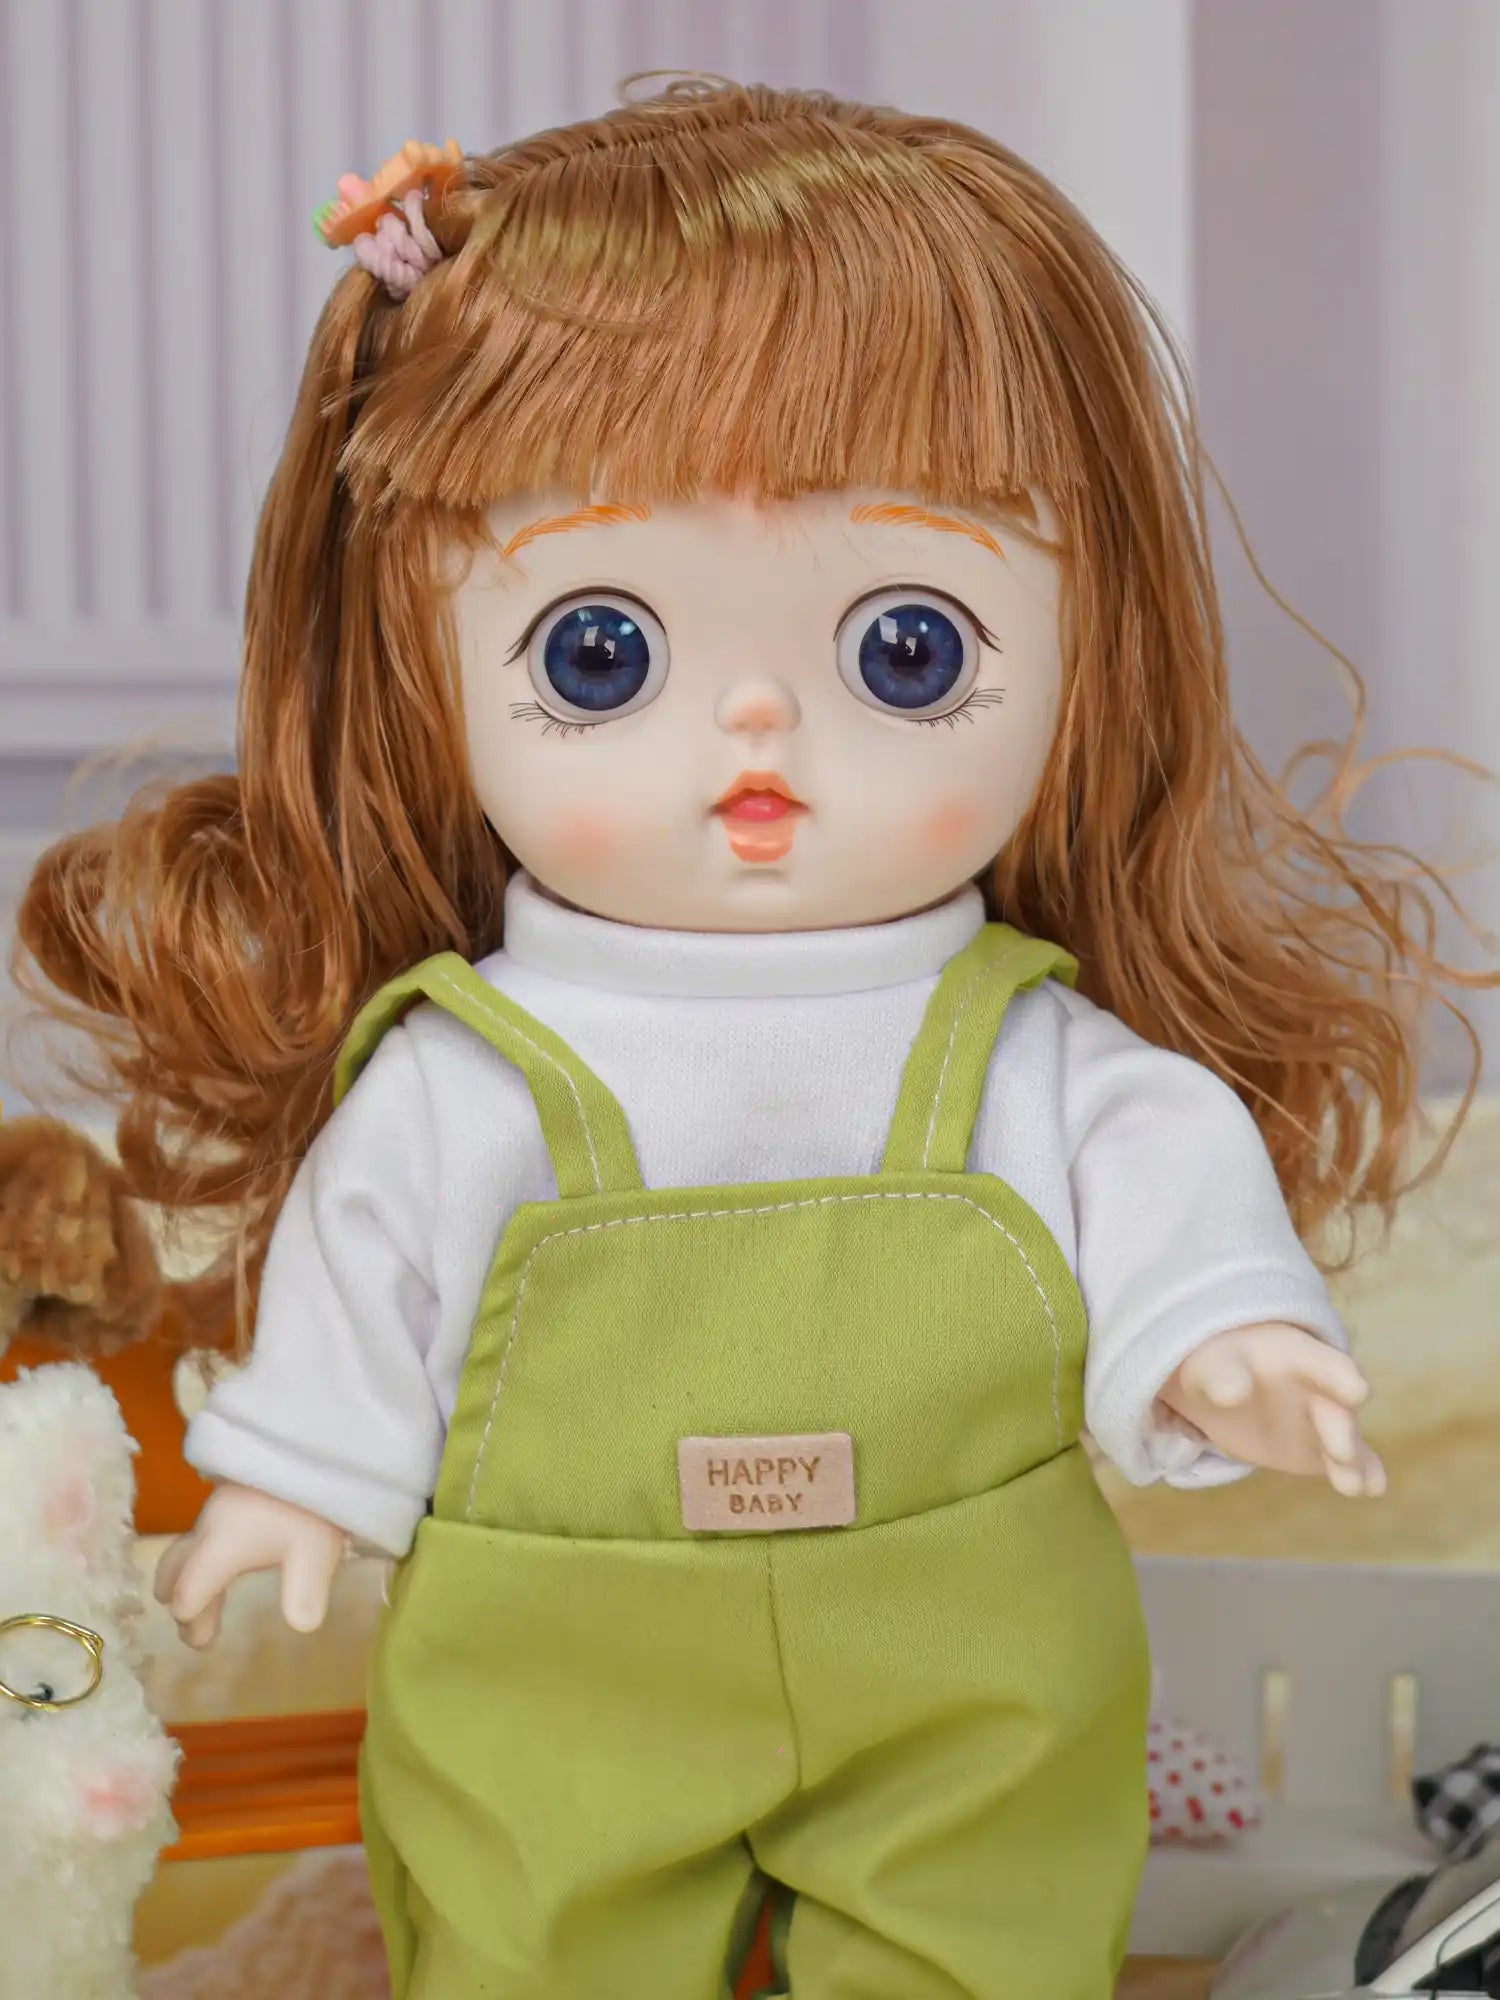 A toy doll with a tender expression, dressed in a casual outfit with a hair clip, stands by a plush kitten with glasses.